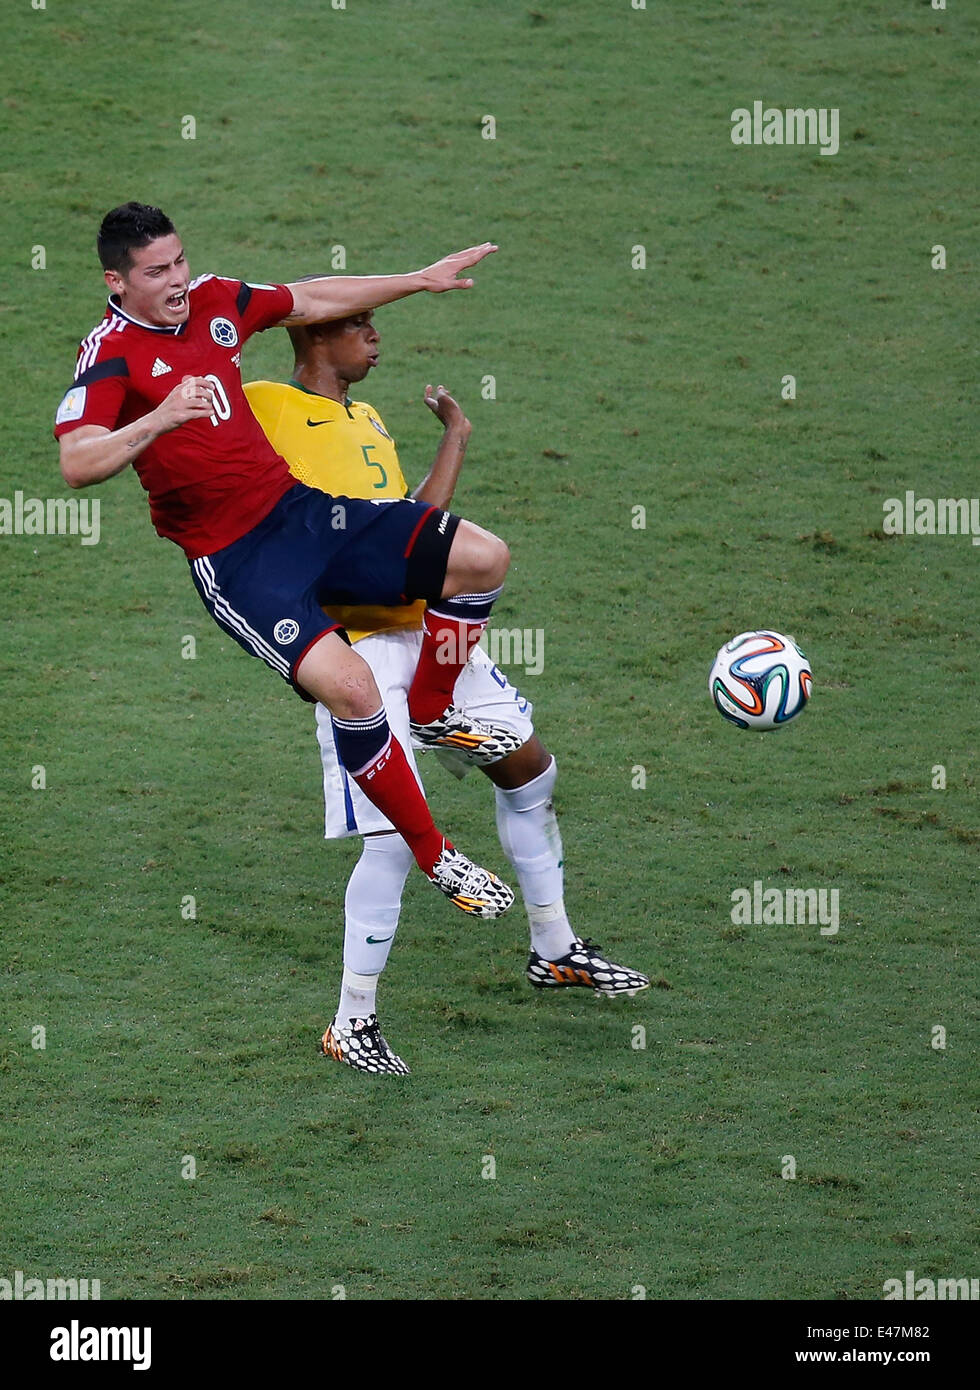 Fortaleza, Brazil. 4th July, 2014. Brazil's Fernandinho (R) vies with Colombia's James Rodriguez during a quarter-finals match between Brazil and Colombia of 2014 FIFA World Cup at the Estadio Castelao Stadium in Fortaleza, Brazil, on July 4, 2014. Credit:  Liao Yujie/Xinhua/Alamy Live News Stock Photo